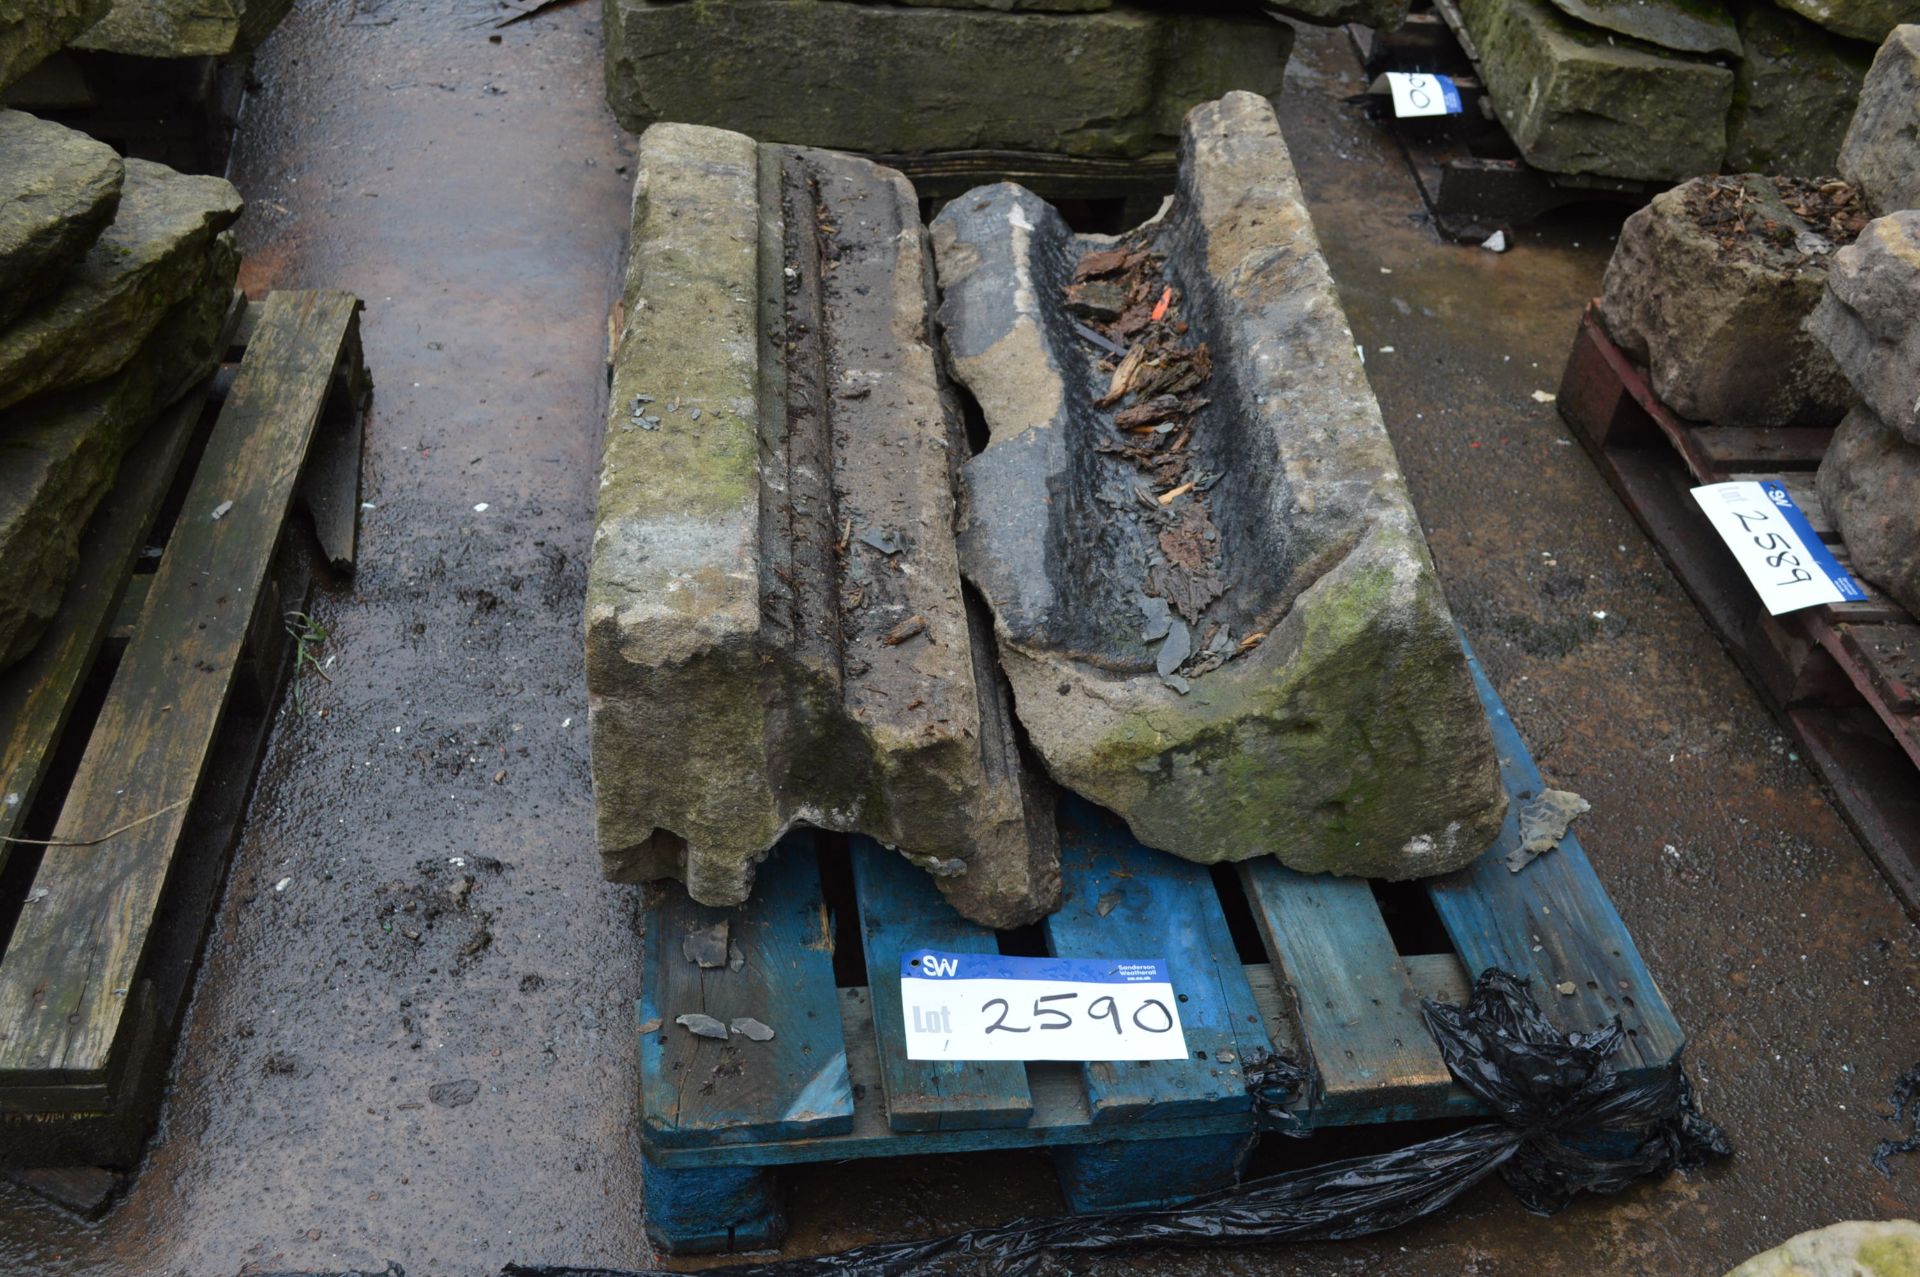 Assorted Stone, as set out on pallet